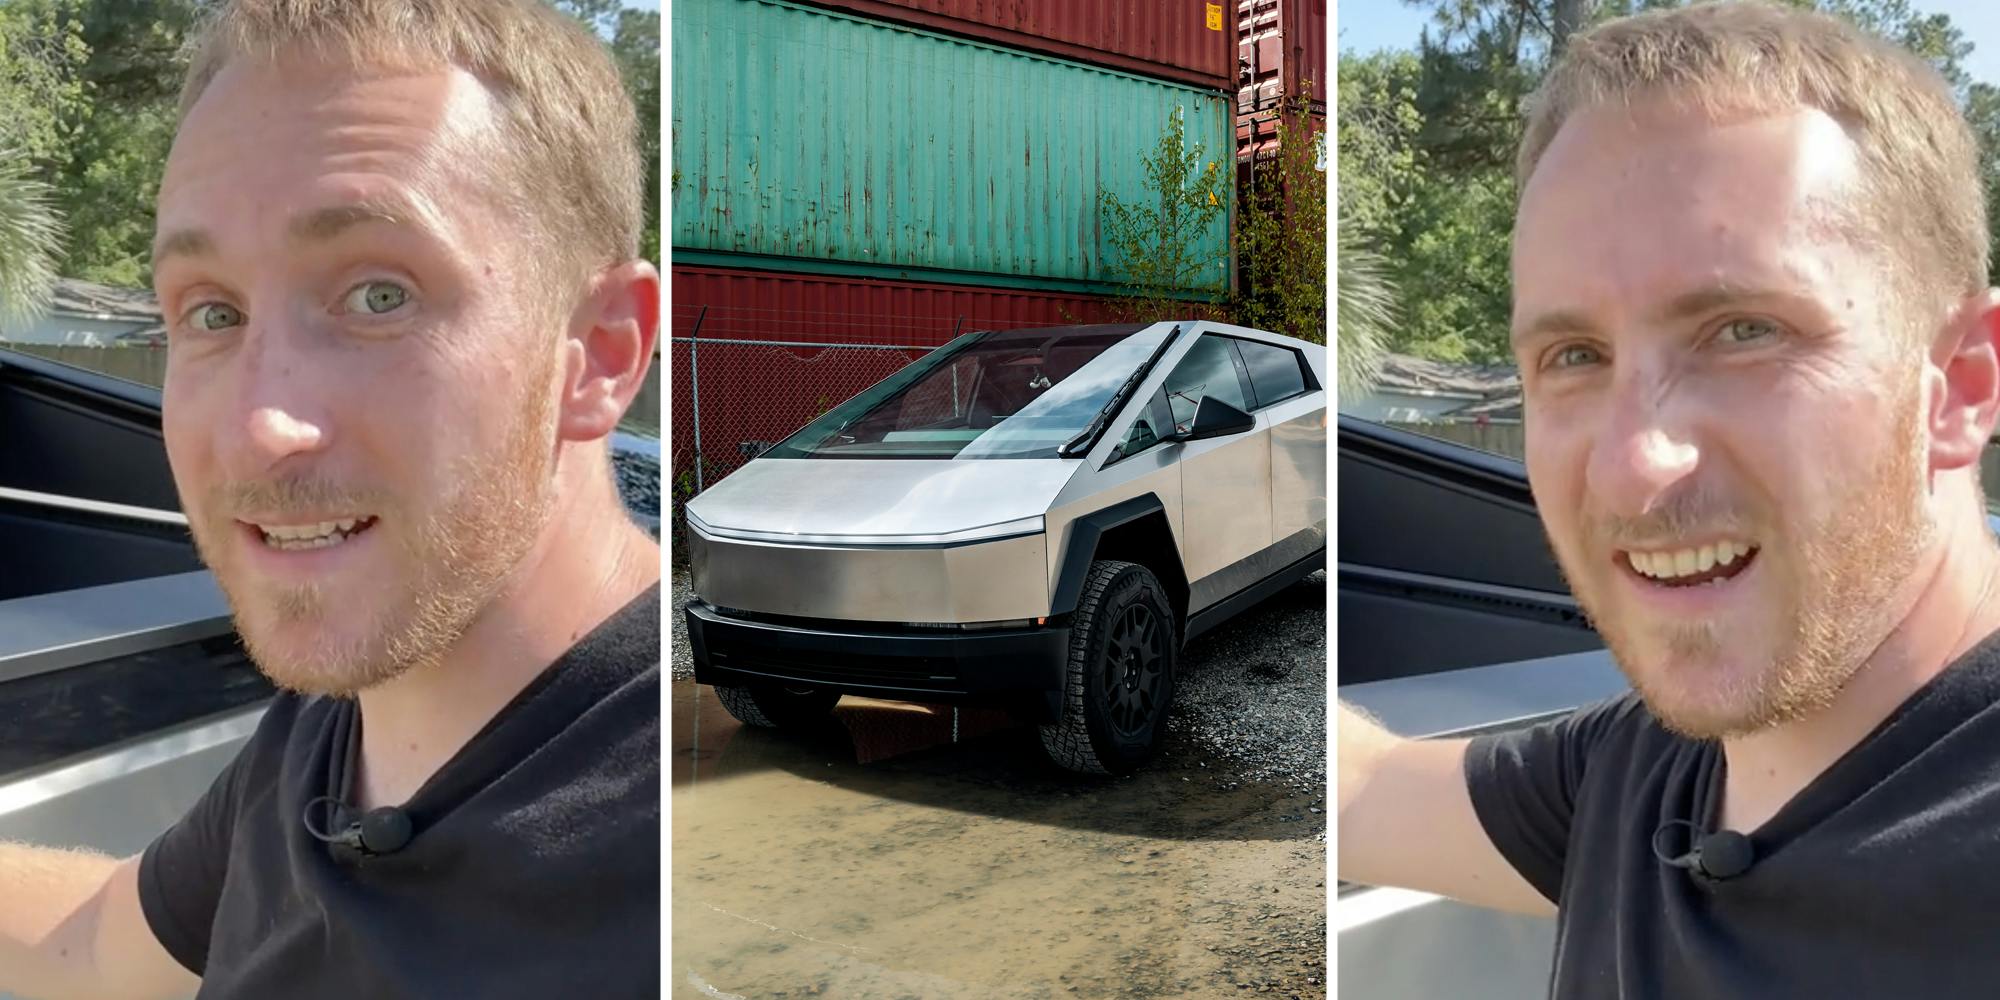 ‘I paid 100 grand for this car. It should open and close when I tell it to’: Man says his Tesla Cybertruck’s cover for truck bed stopped working